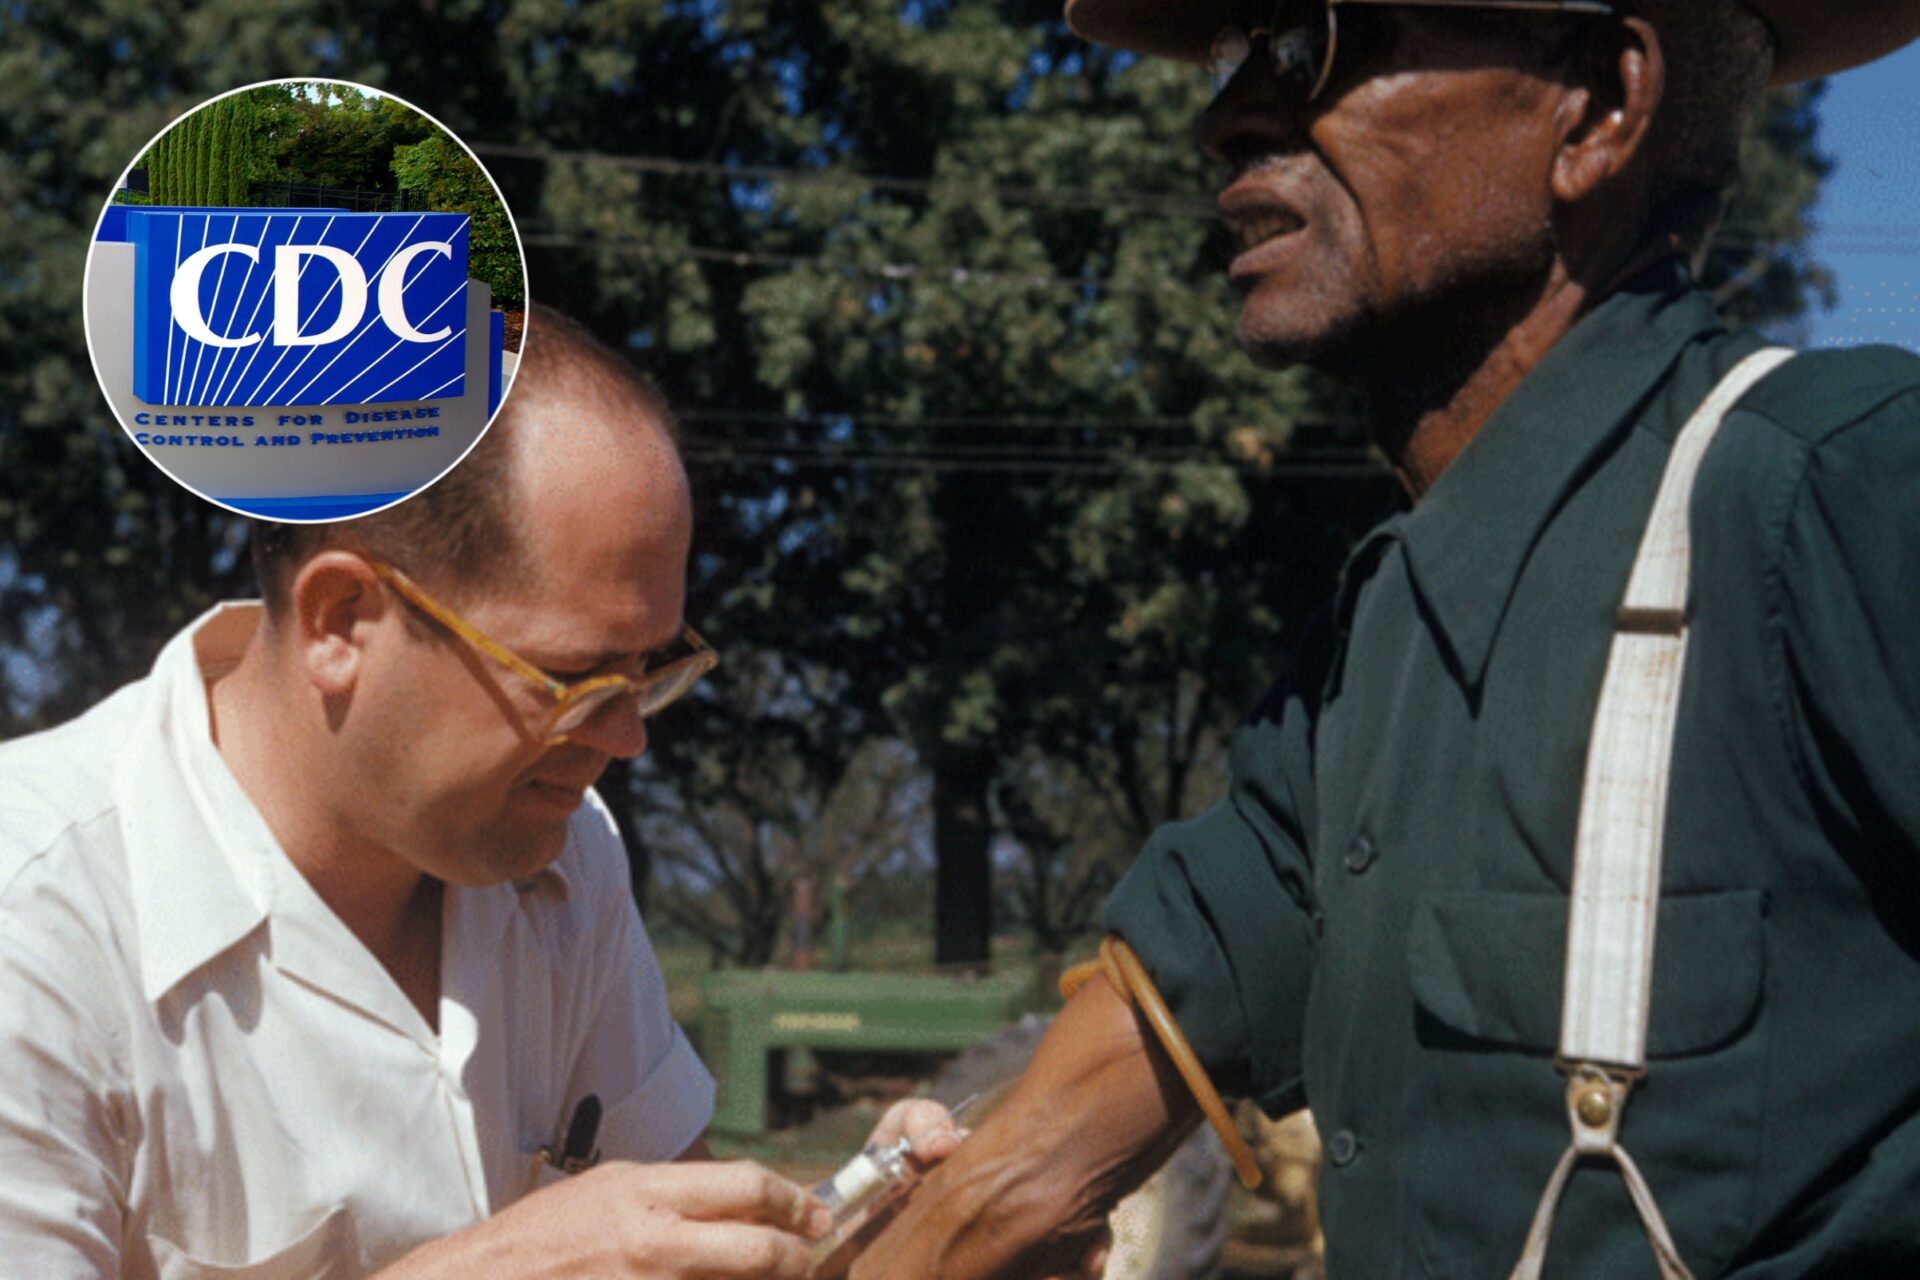 CDC Foundation Launches Scholarship Program For Descendants Of Tuskegee Syphilis Study Victims